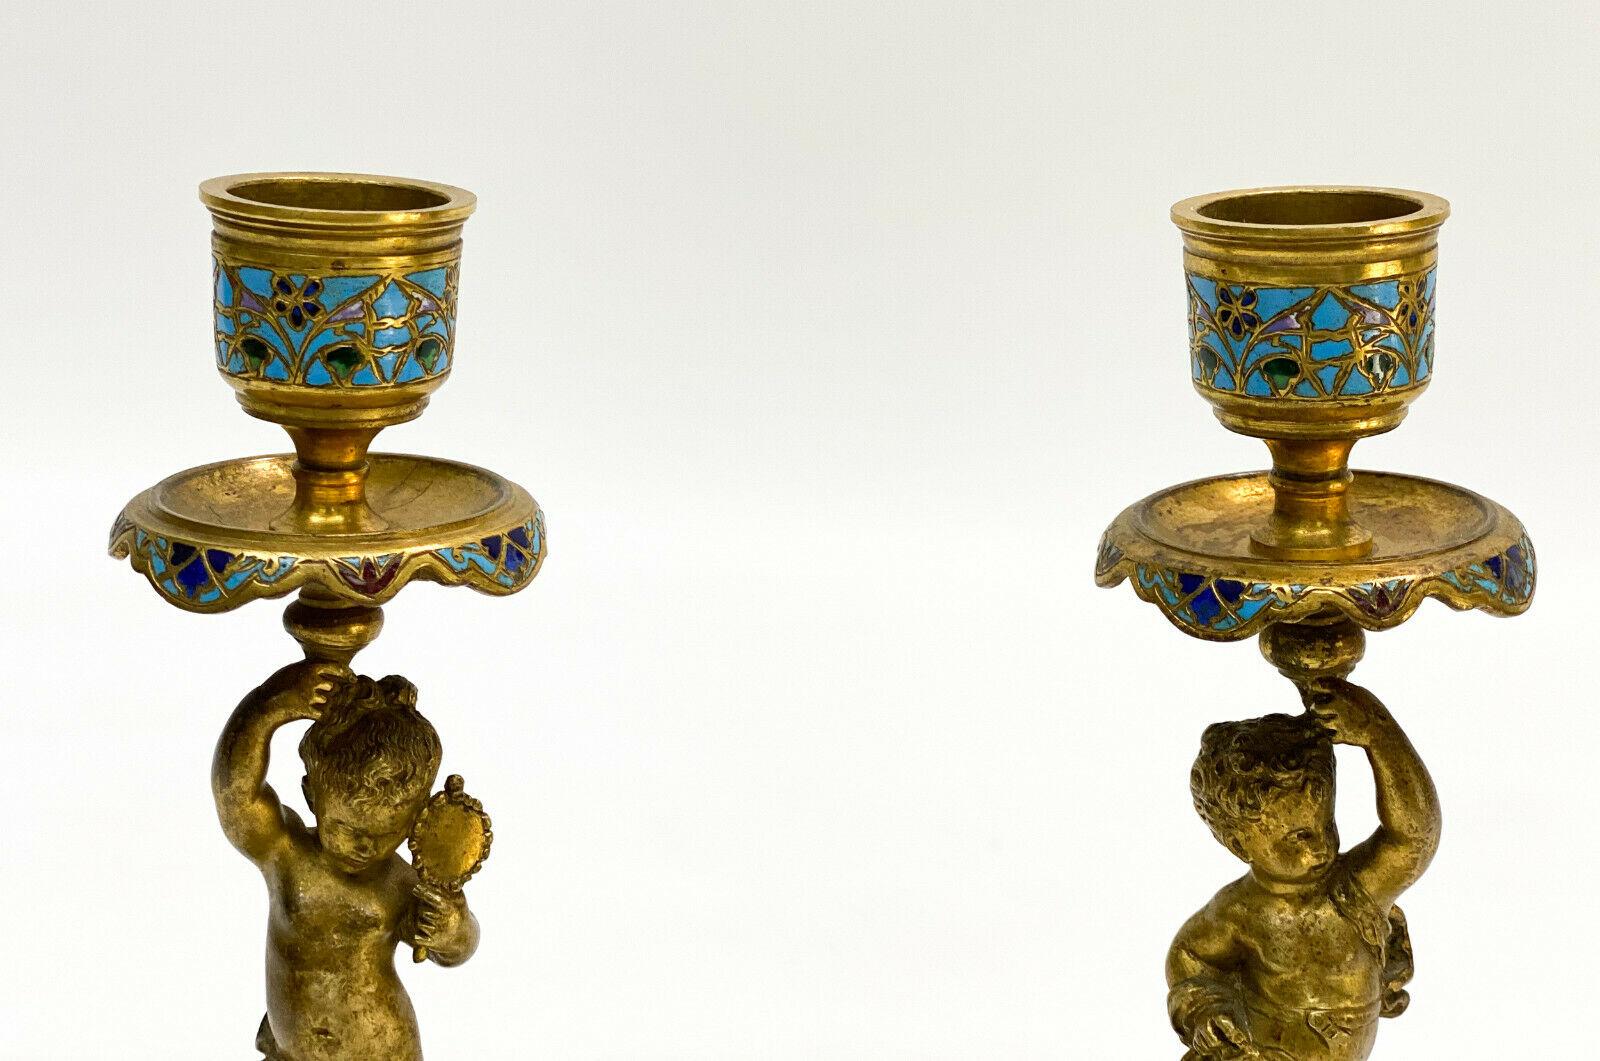 Hand-Painted Pair of French Champleve Enamel Bronze Candlesticks, Late 19th Century